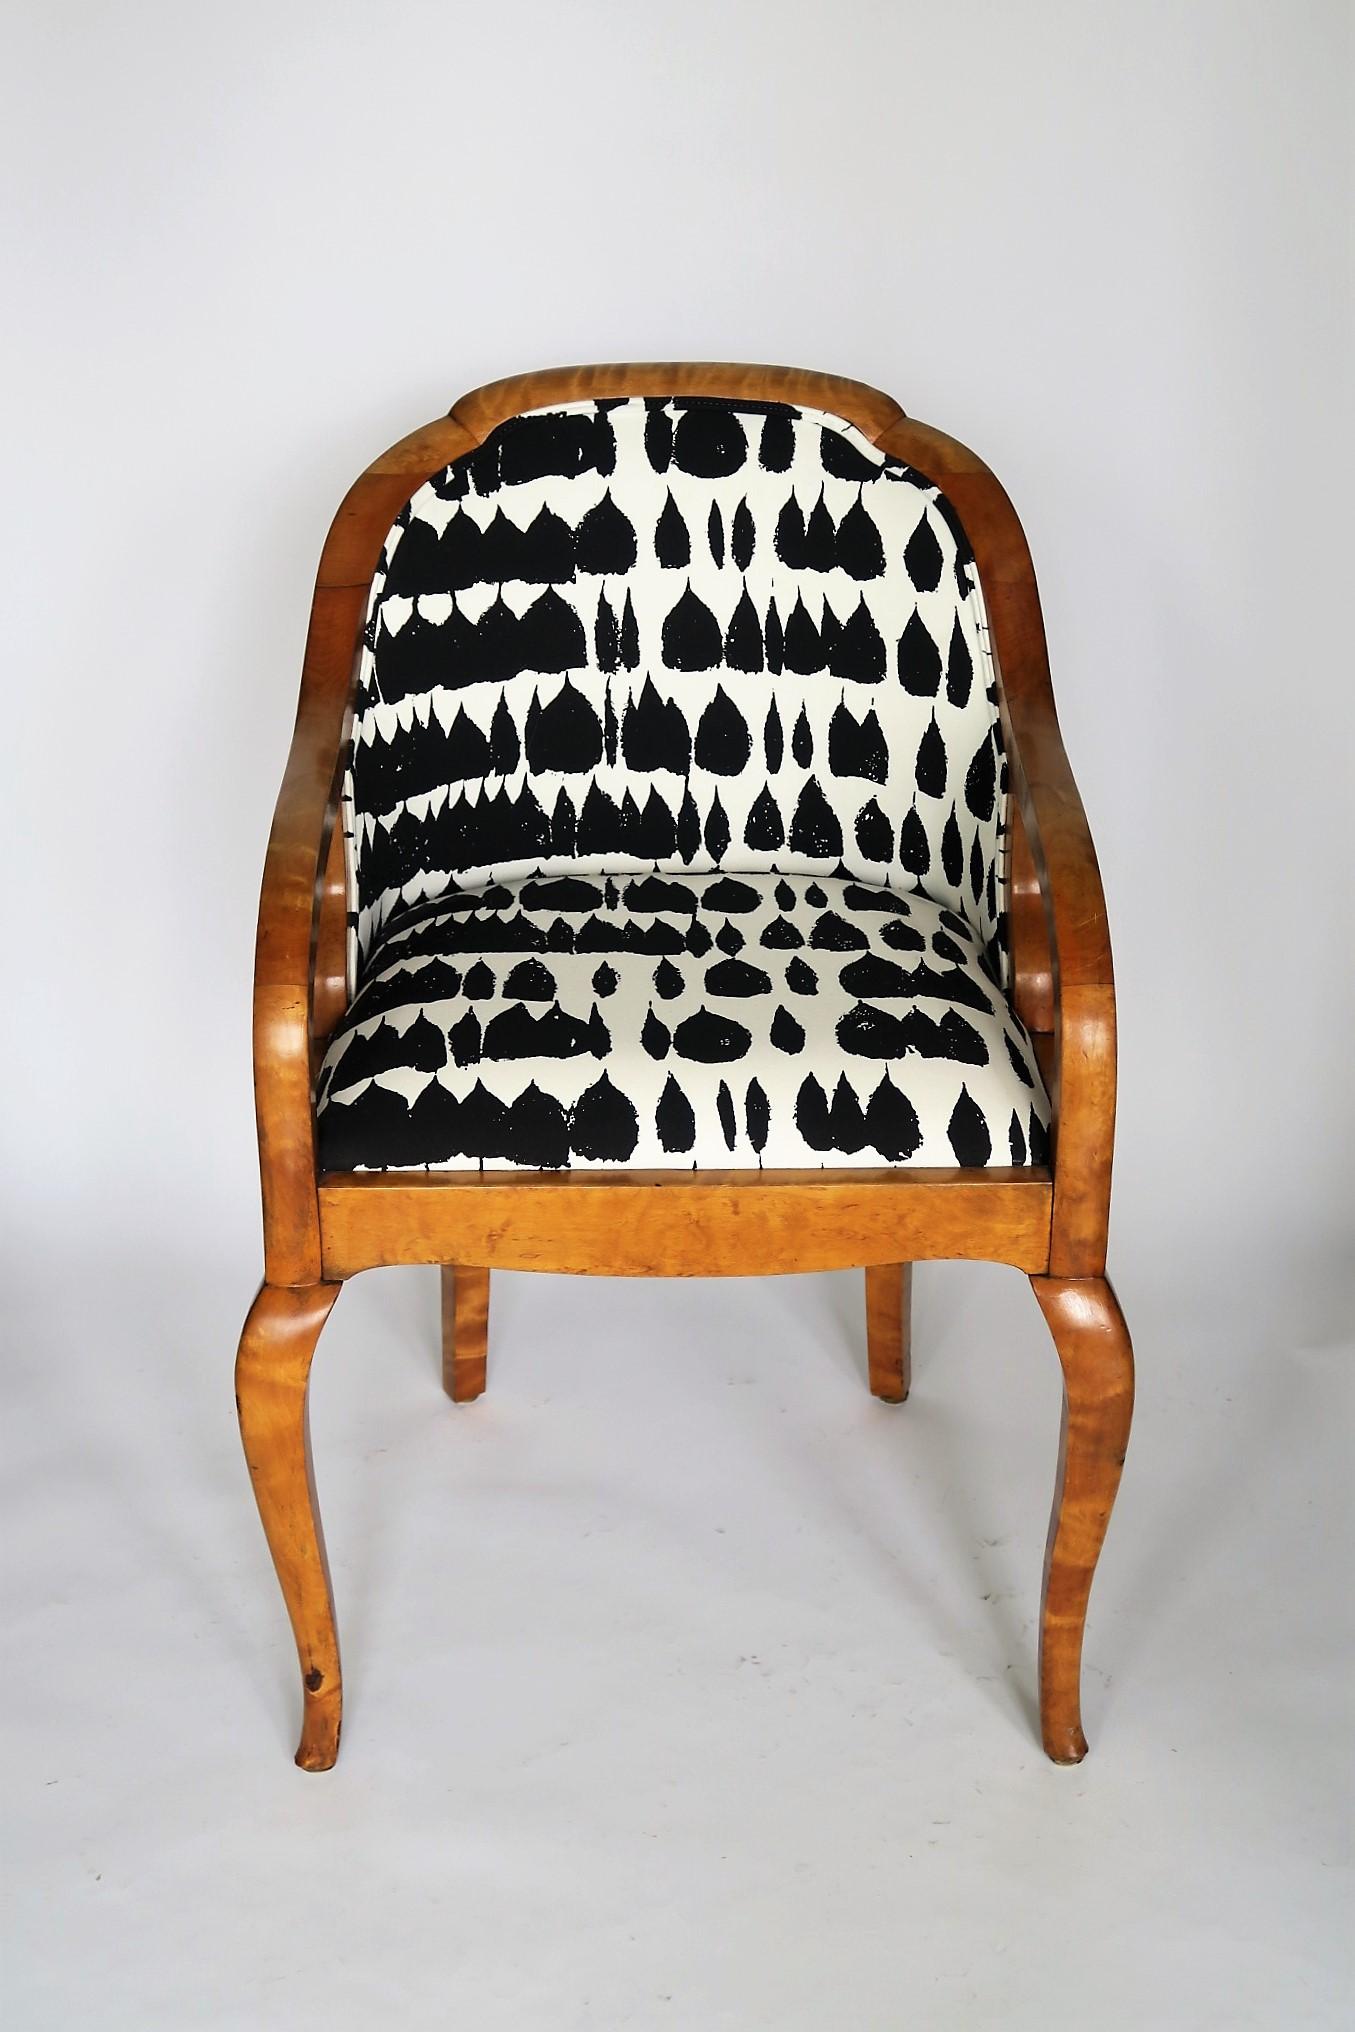 Hand-Crafted Swedish Birch Accent Biedermeier Armchair with Black and White Fabric circa 1890